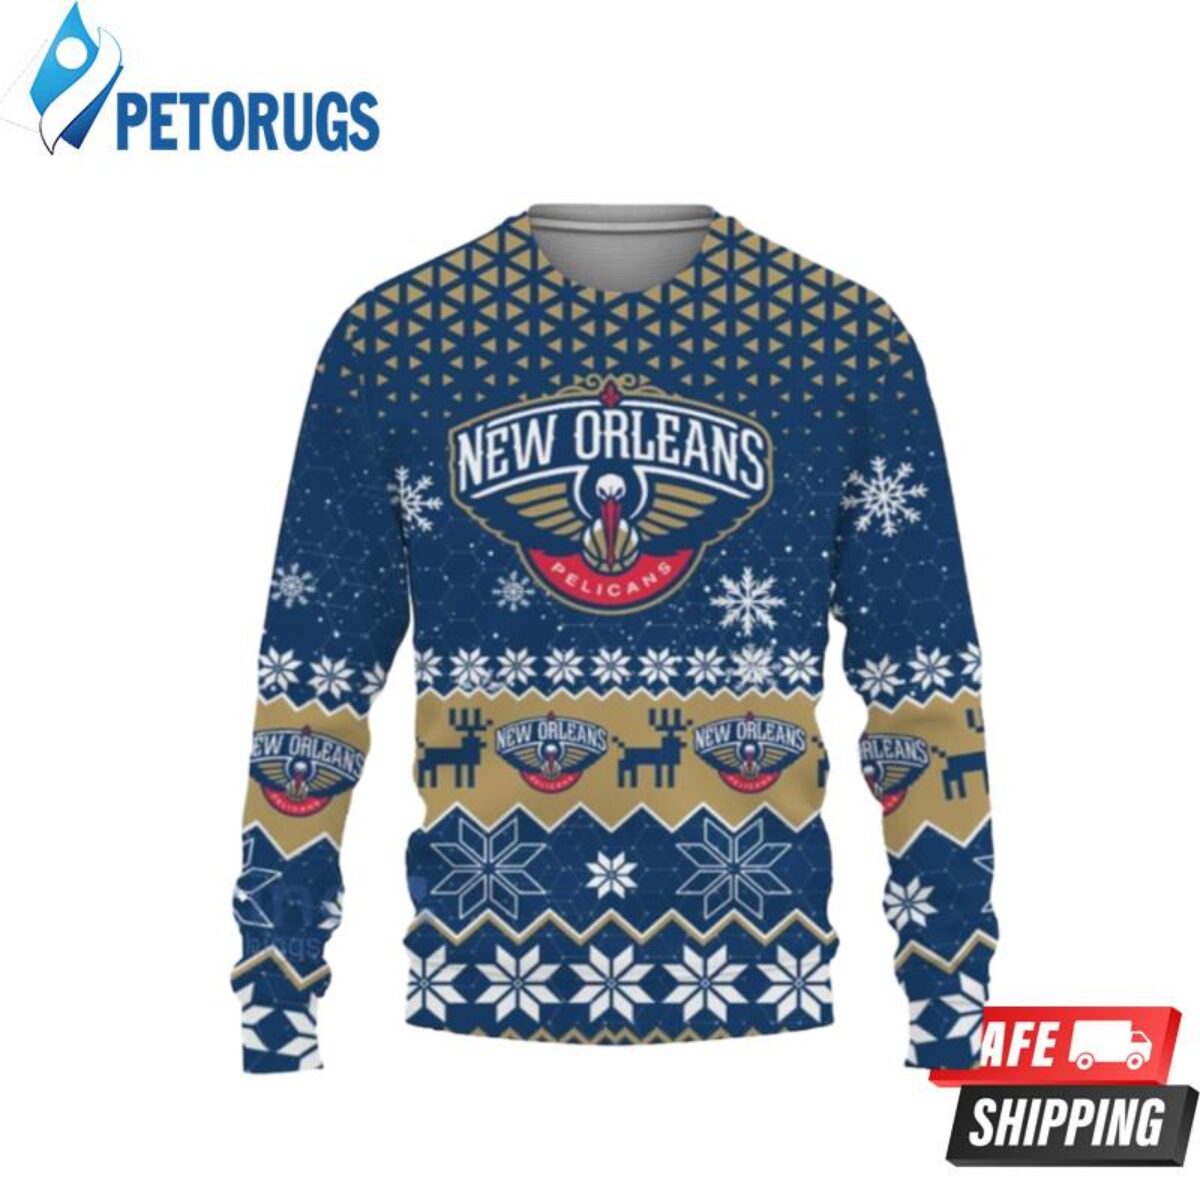 New Orleans Pelicans NBA Basketball Knit Pattern Ugly Christmas